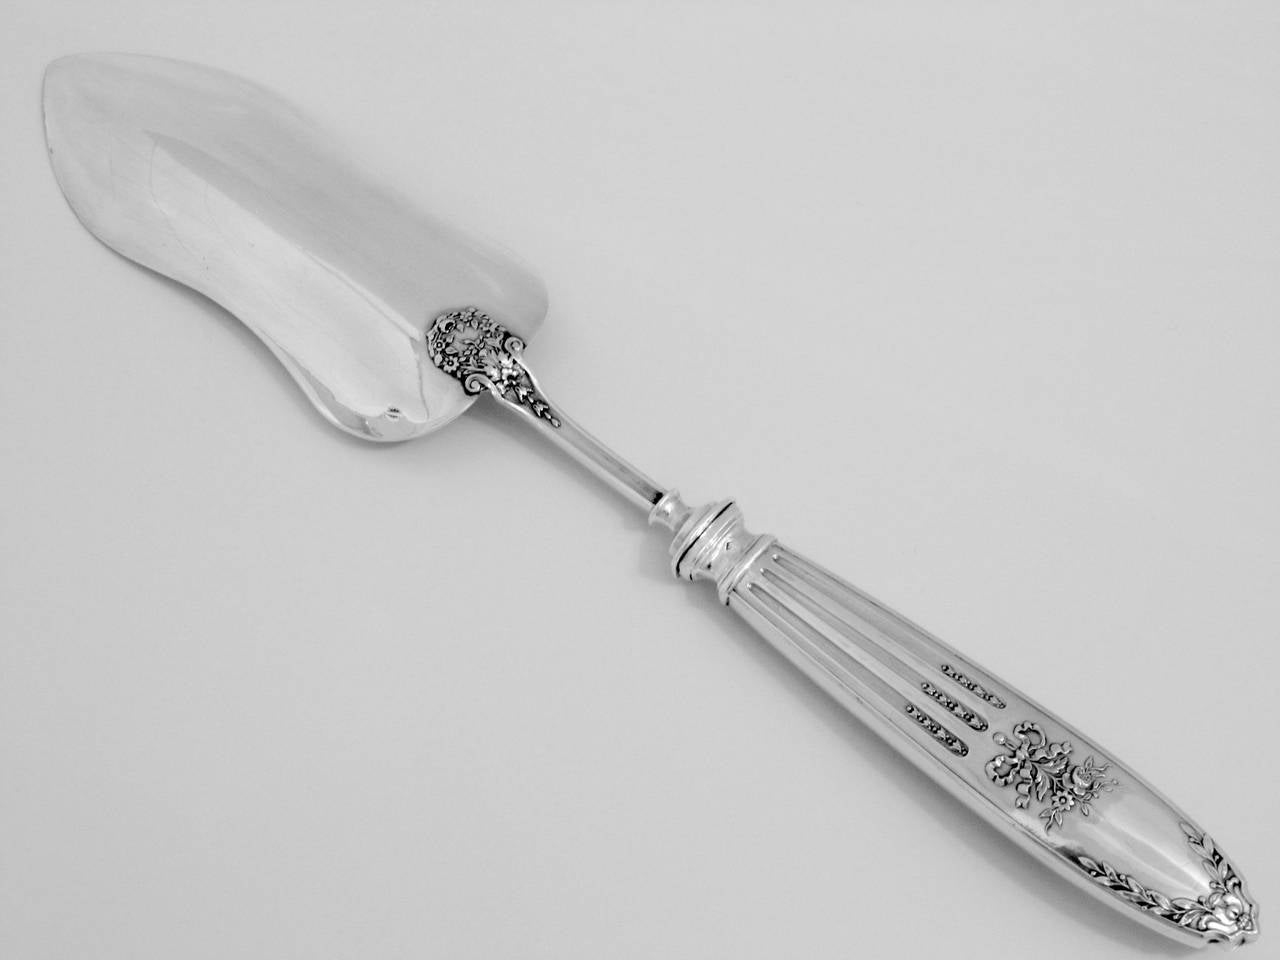 Neoclassical Lapparra French All Sterling Silver Pie/Pastry/Fish Server 12